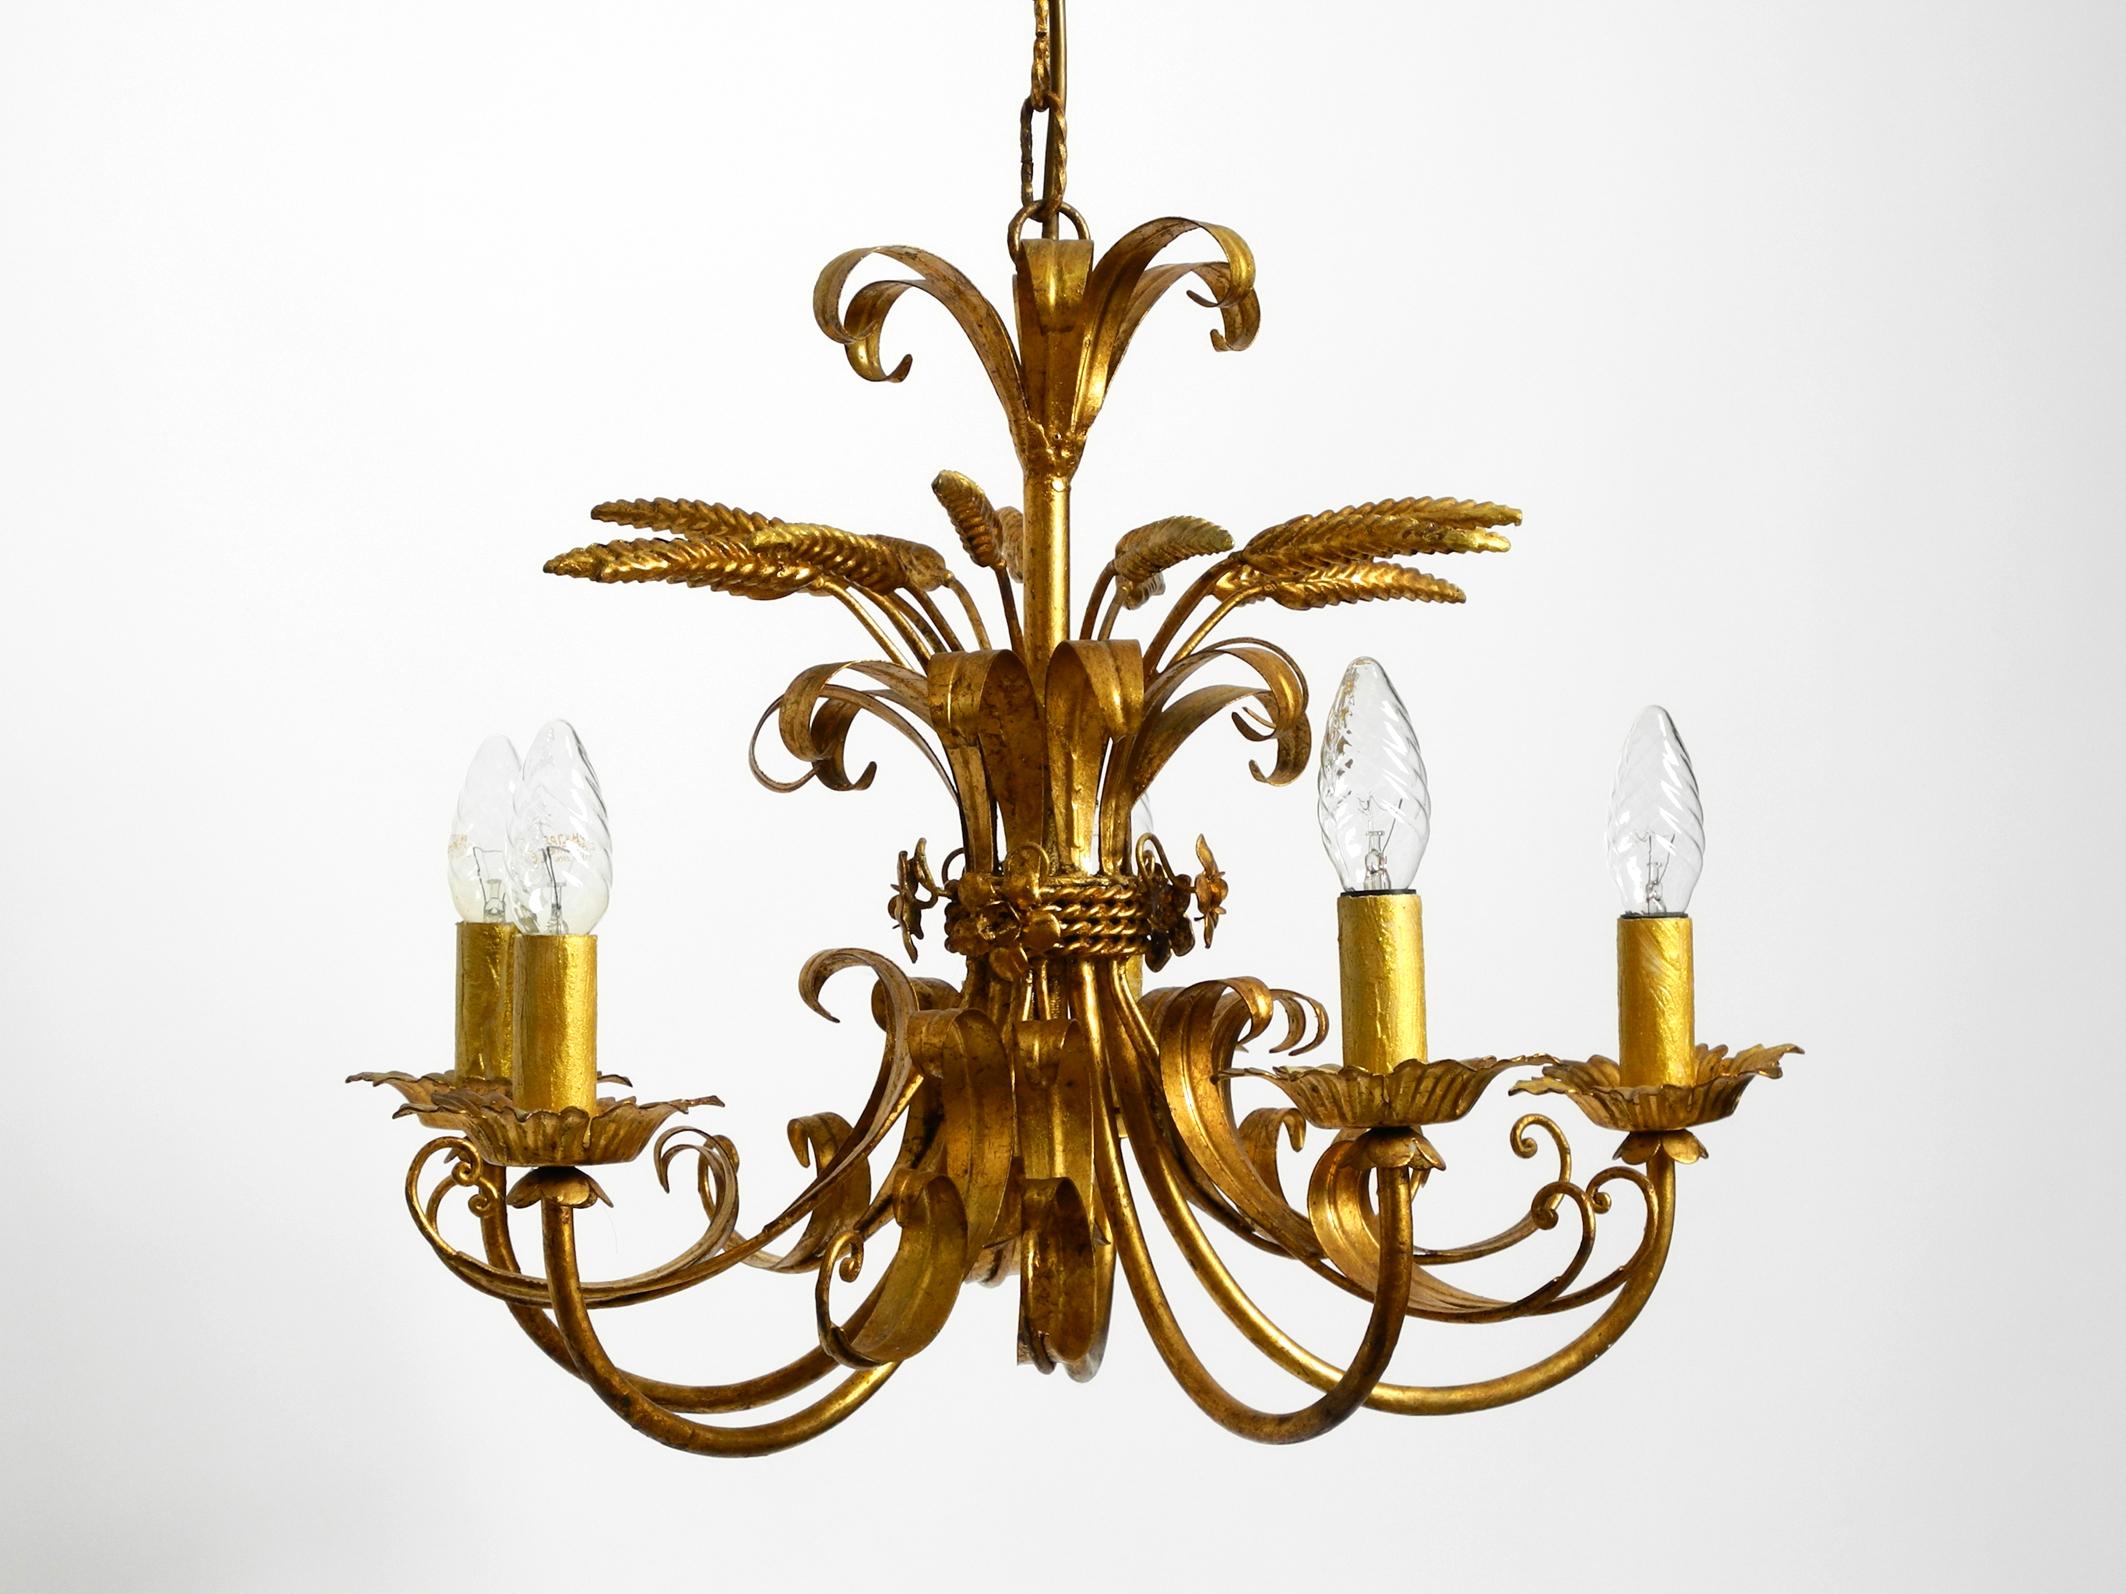 European Beautiful 1970s gold-plated large 5-armed metal chandelier by Hans Kögl